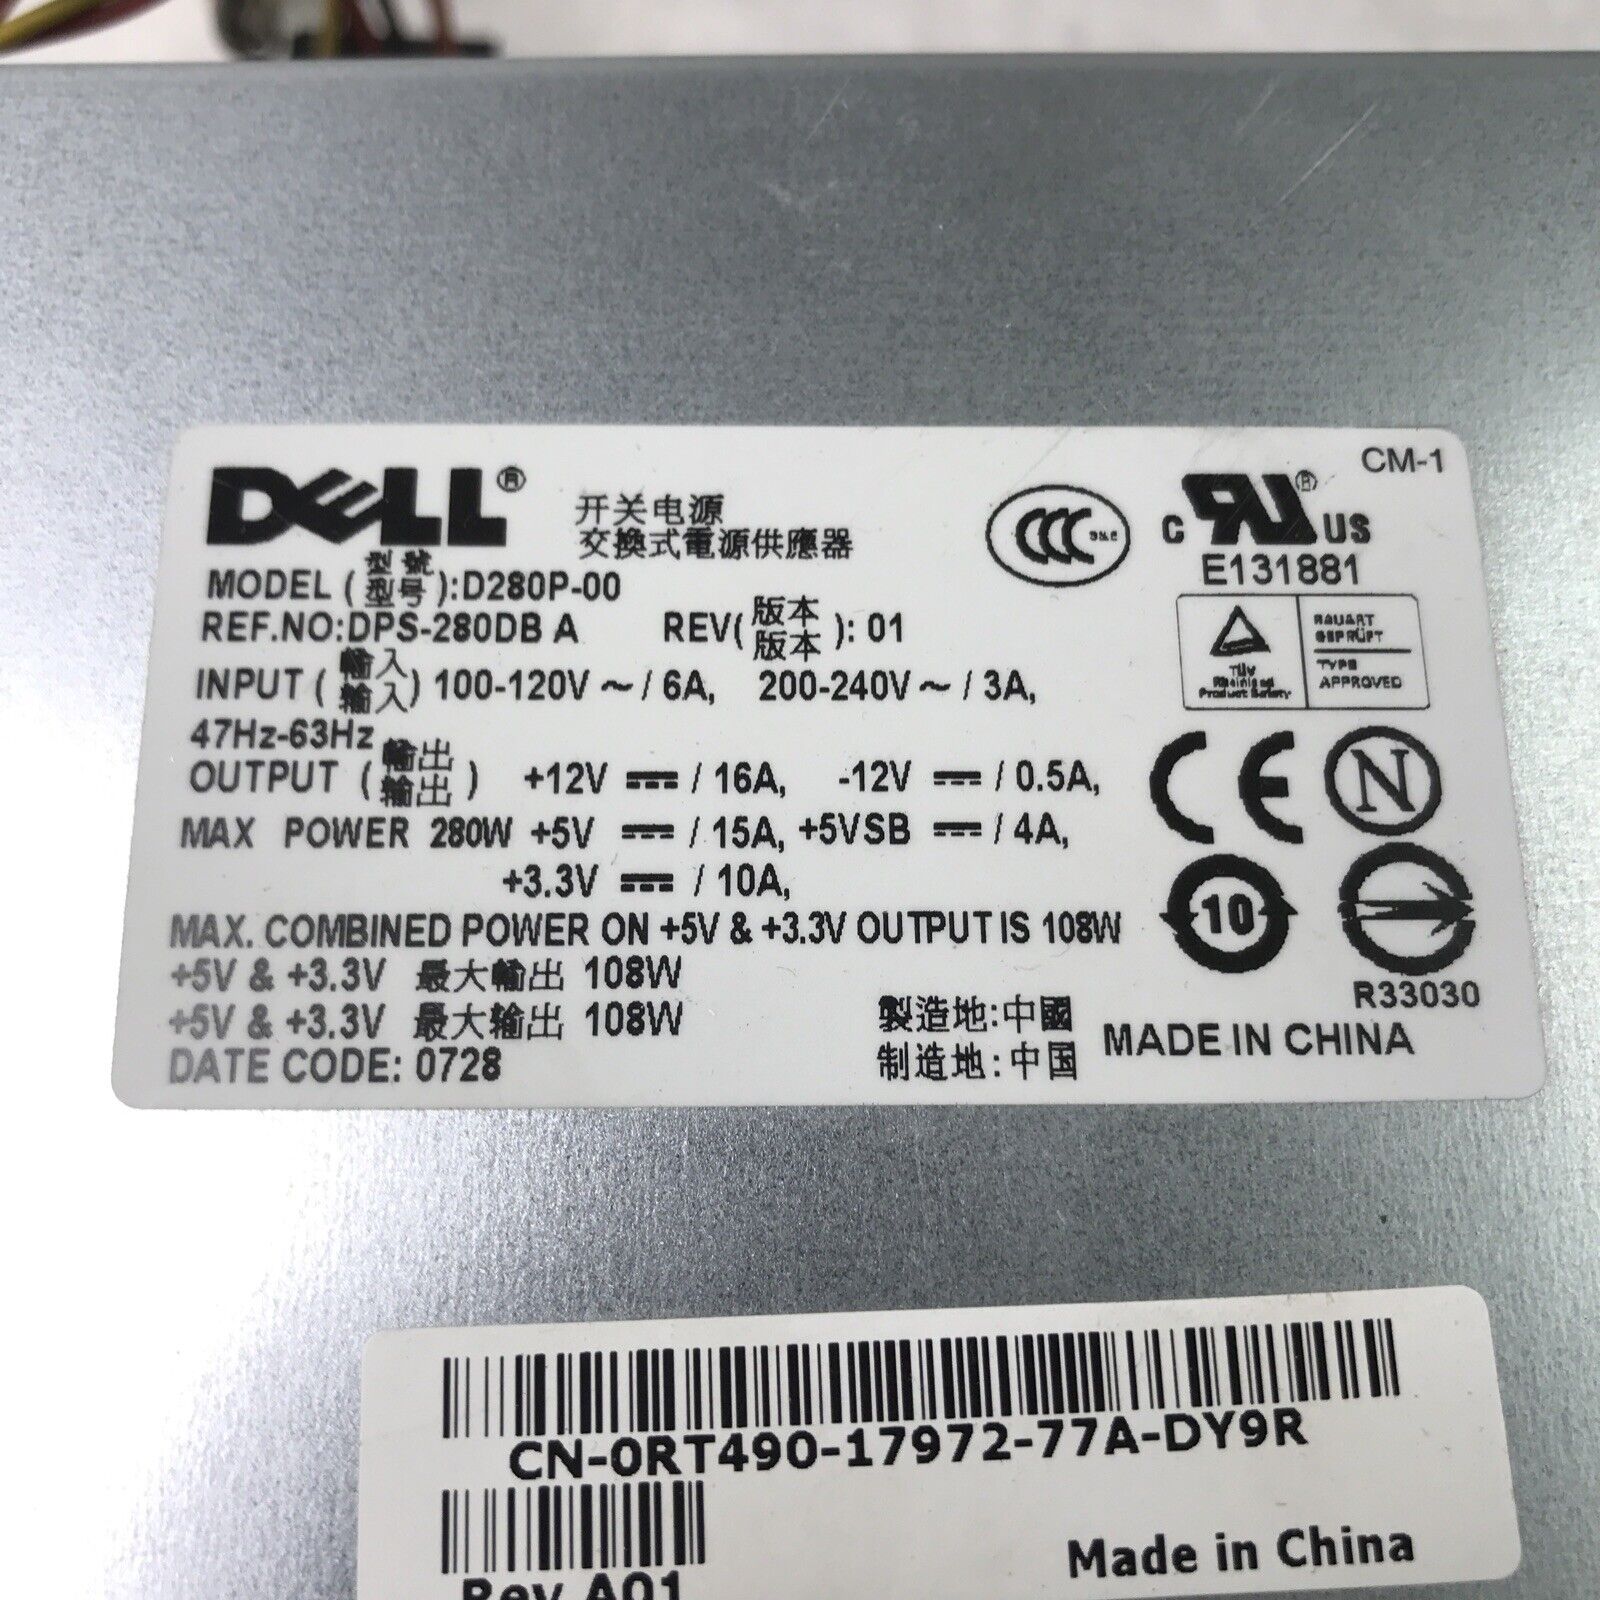 Dell D280P-00 240V 280W 63Hz 16A Power Supply  (Tested and Working)